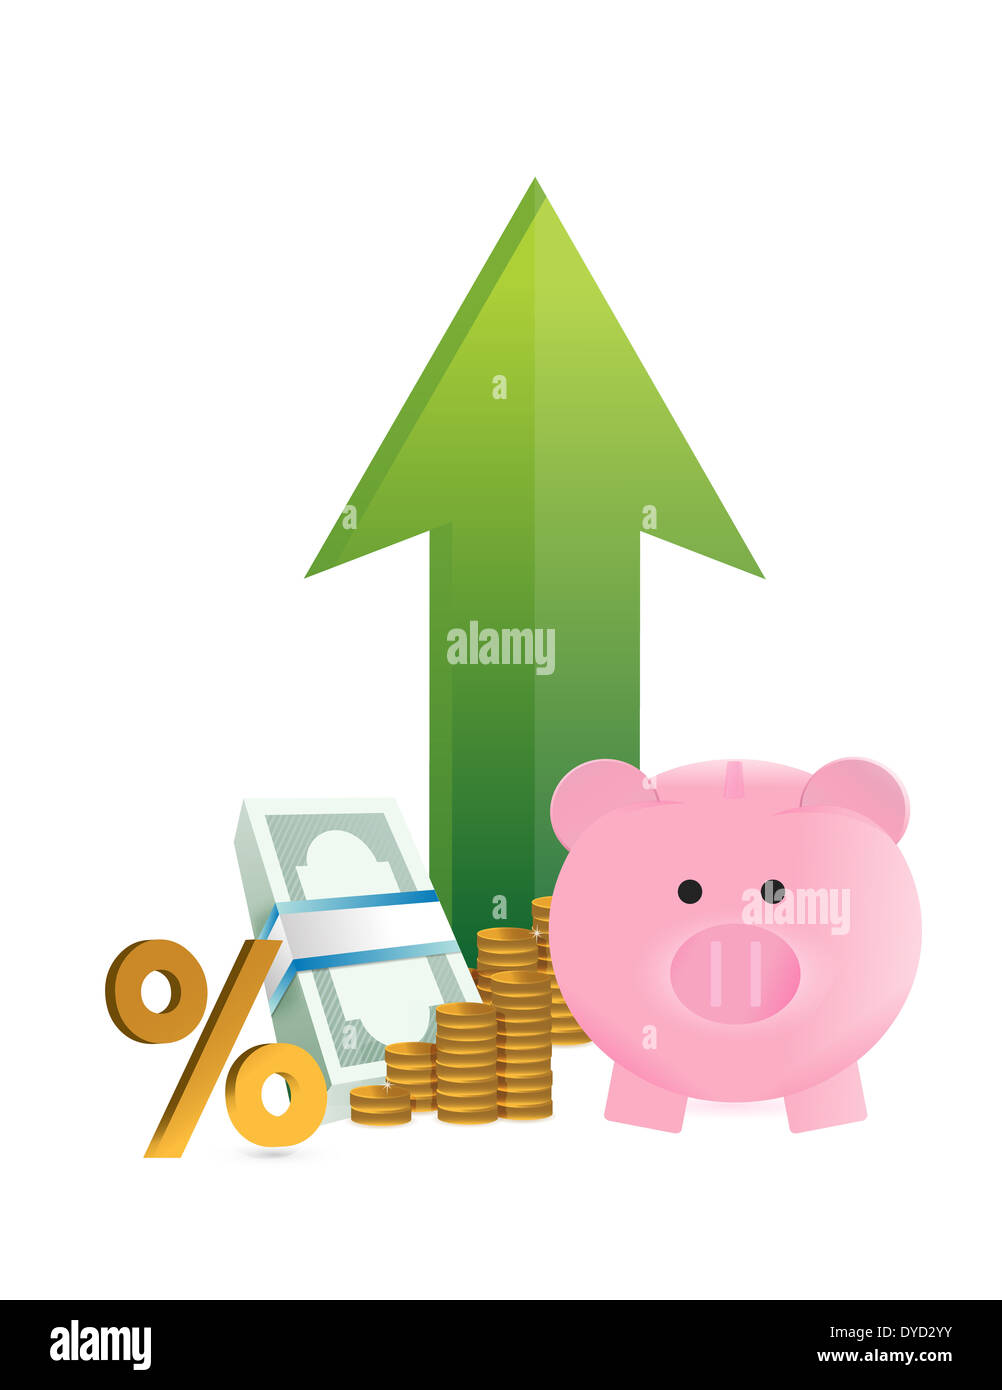 savings going up illustration design over a white background Stock Photo